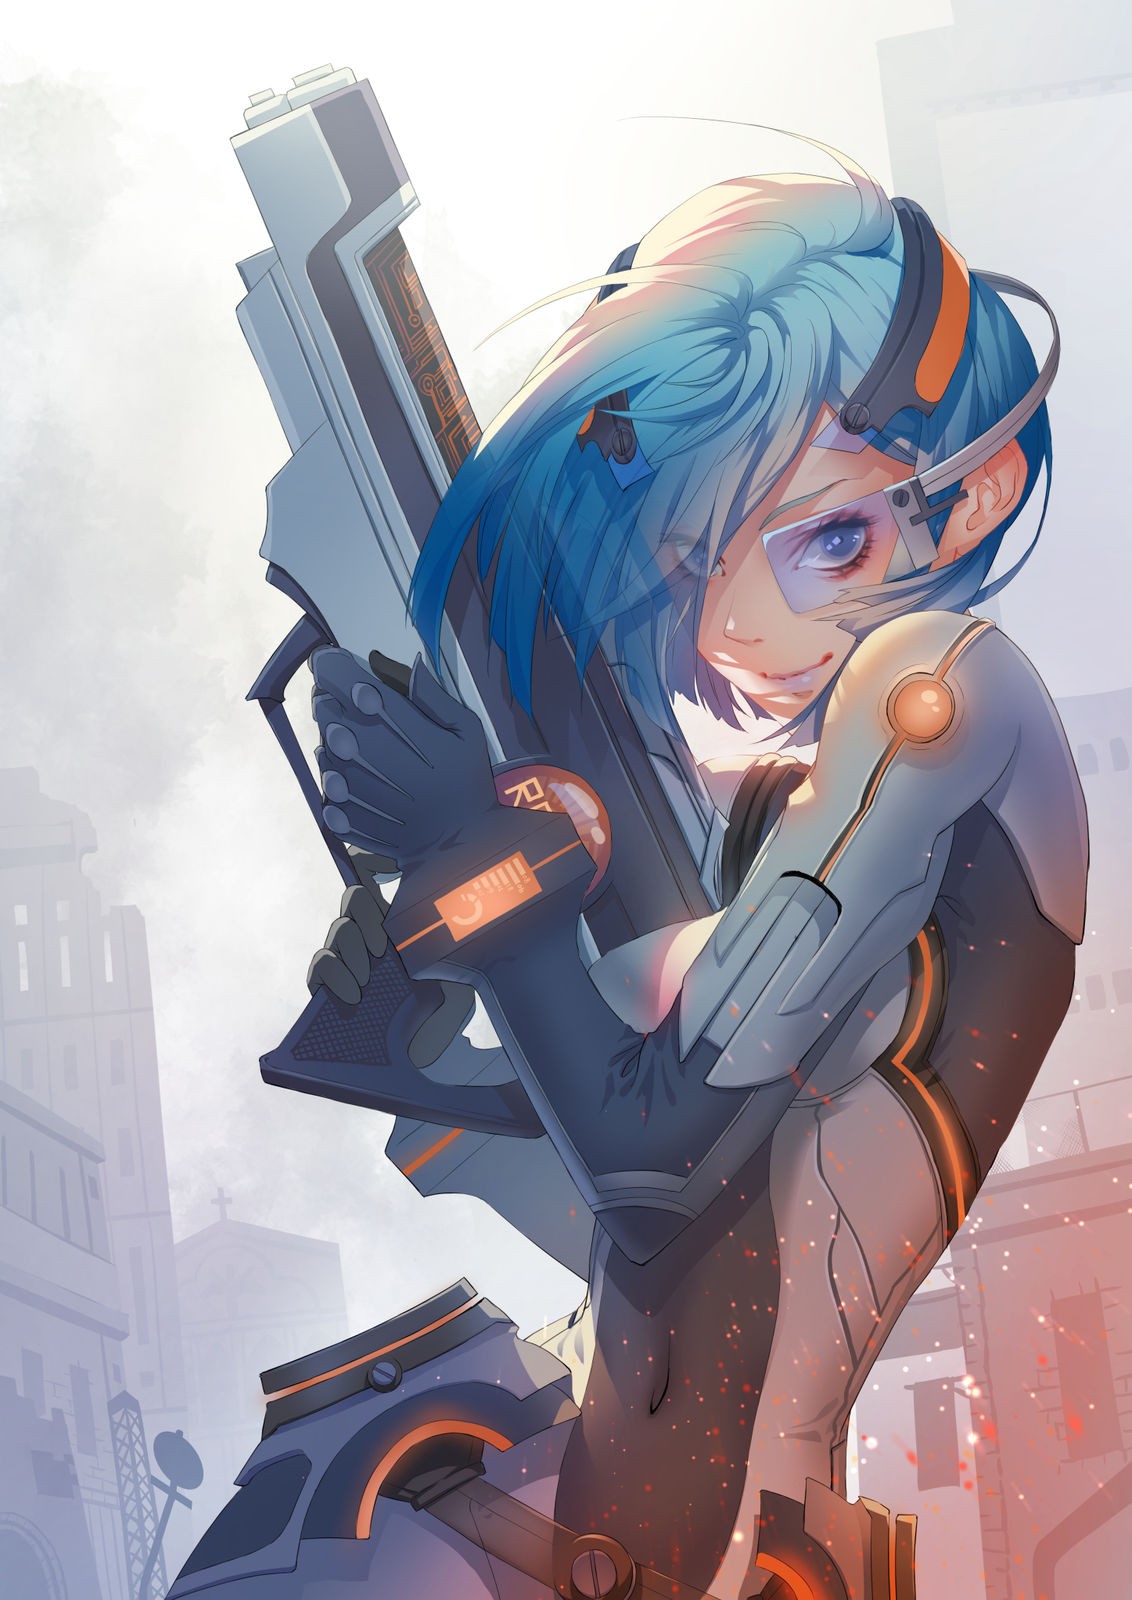 Anime 1132x1600 anime anime girls short hair blue hair rifles science fiction bodysuit science fiction women Futuristic Weapons weapon smiling